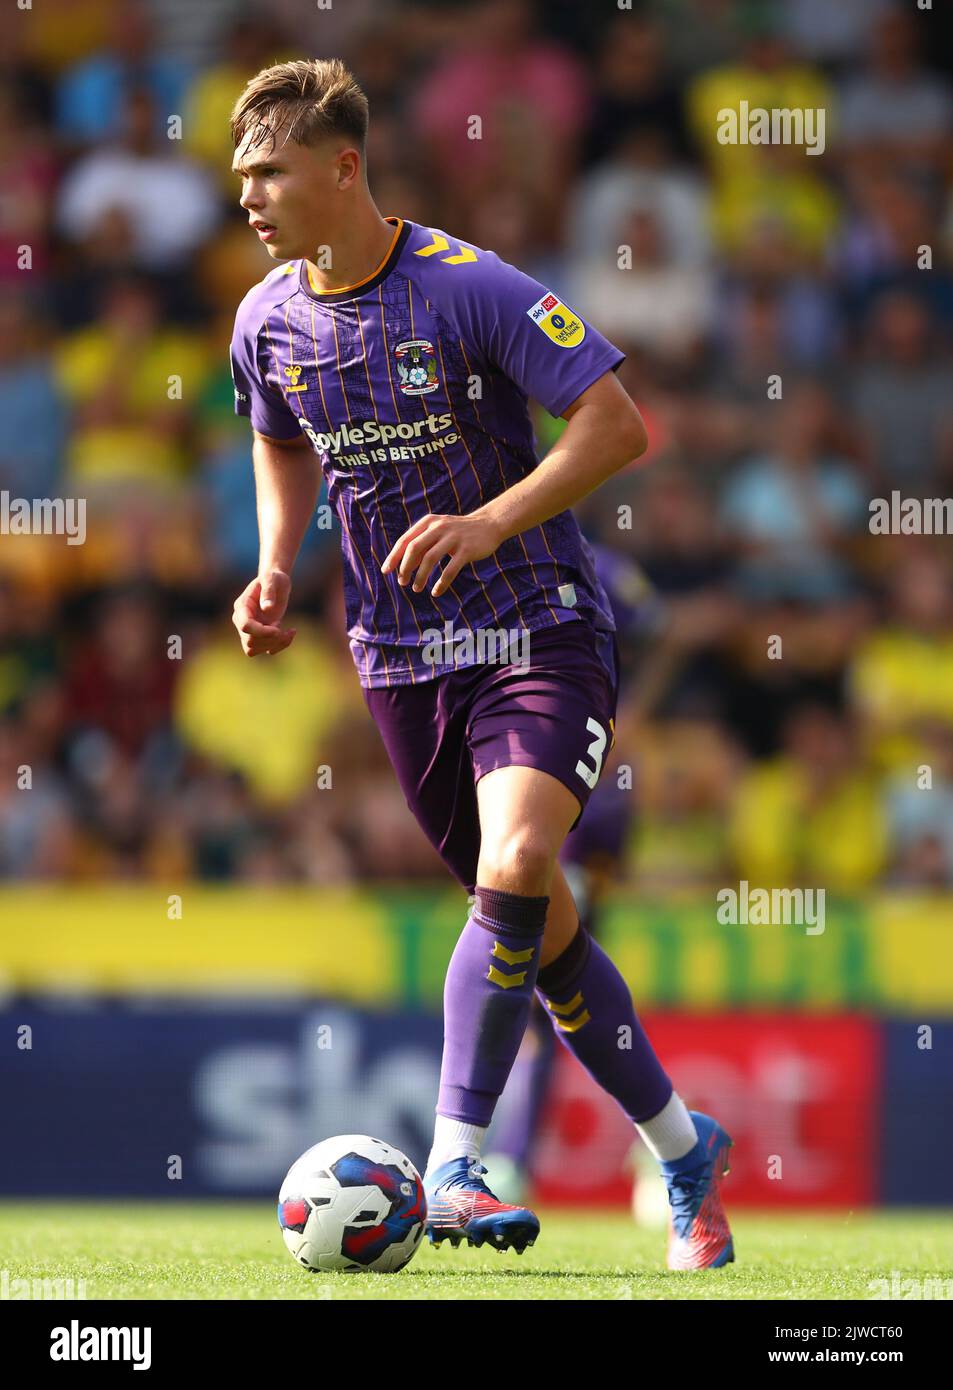 Callum Doyle of Coventry City - Norwich City v Coventry City, Sky Bet Championship, Carrow Road, Norwich, UK - 3rd September 2022  Editorial Use Only - DataCo restrictions apply Stock Photo